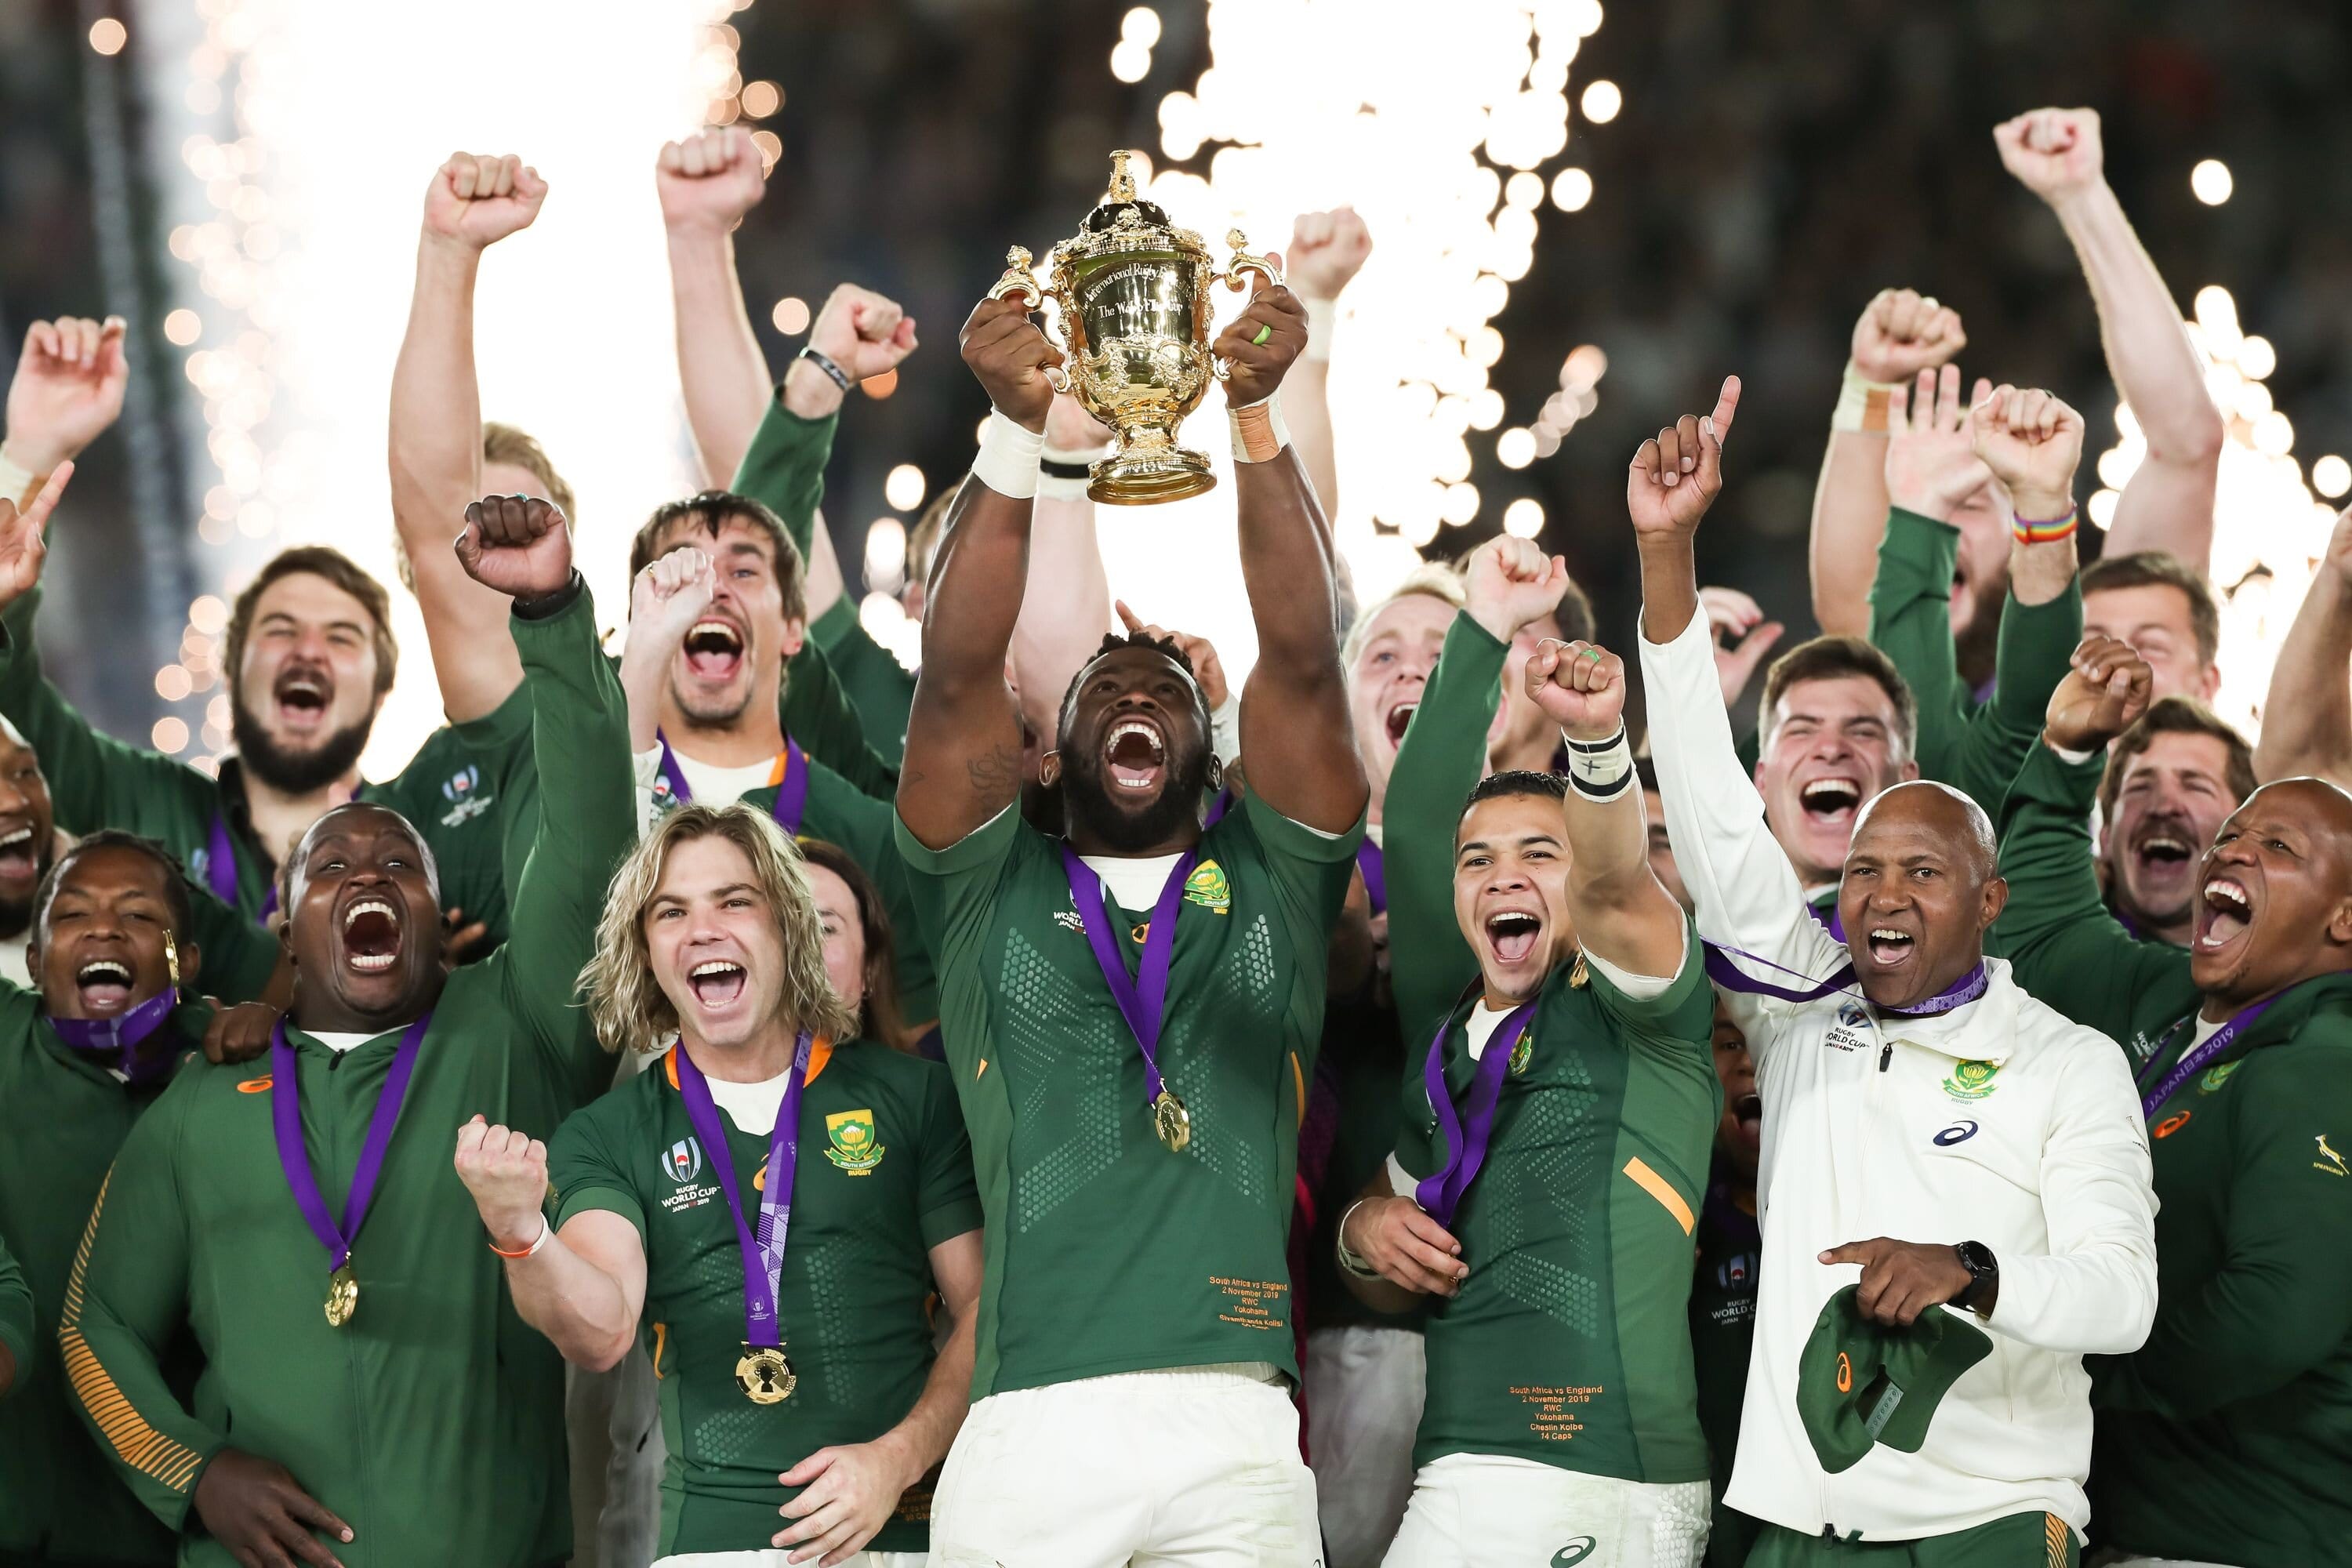 Men's Rugby World Cup Winners 1987-2023